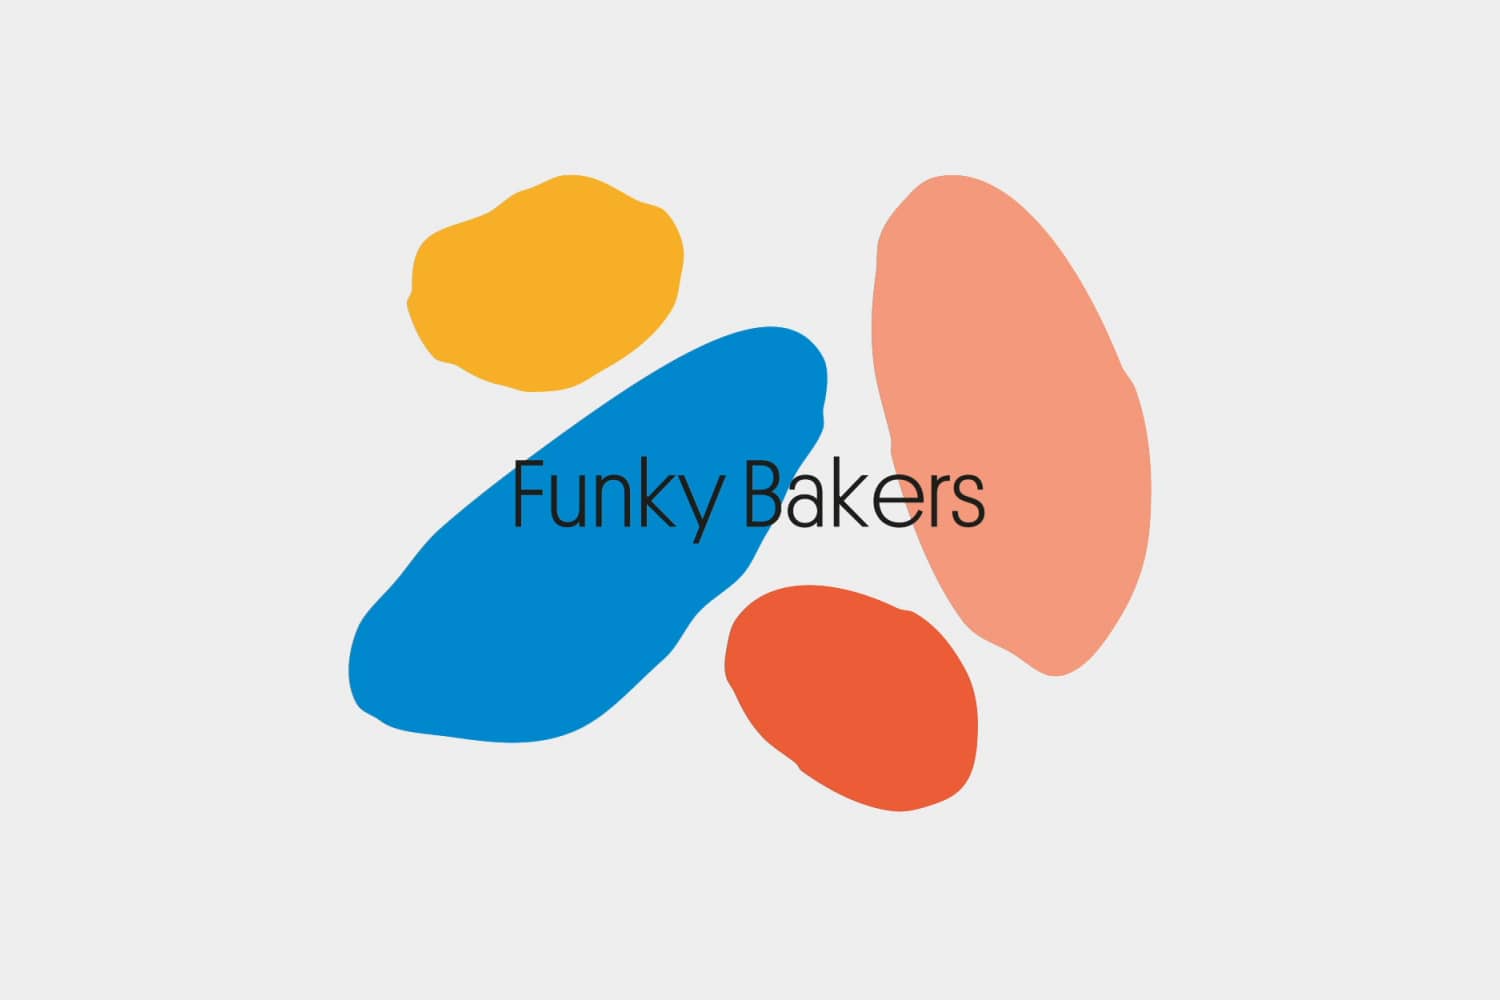 Funky Bakers面包店品牌VI设计